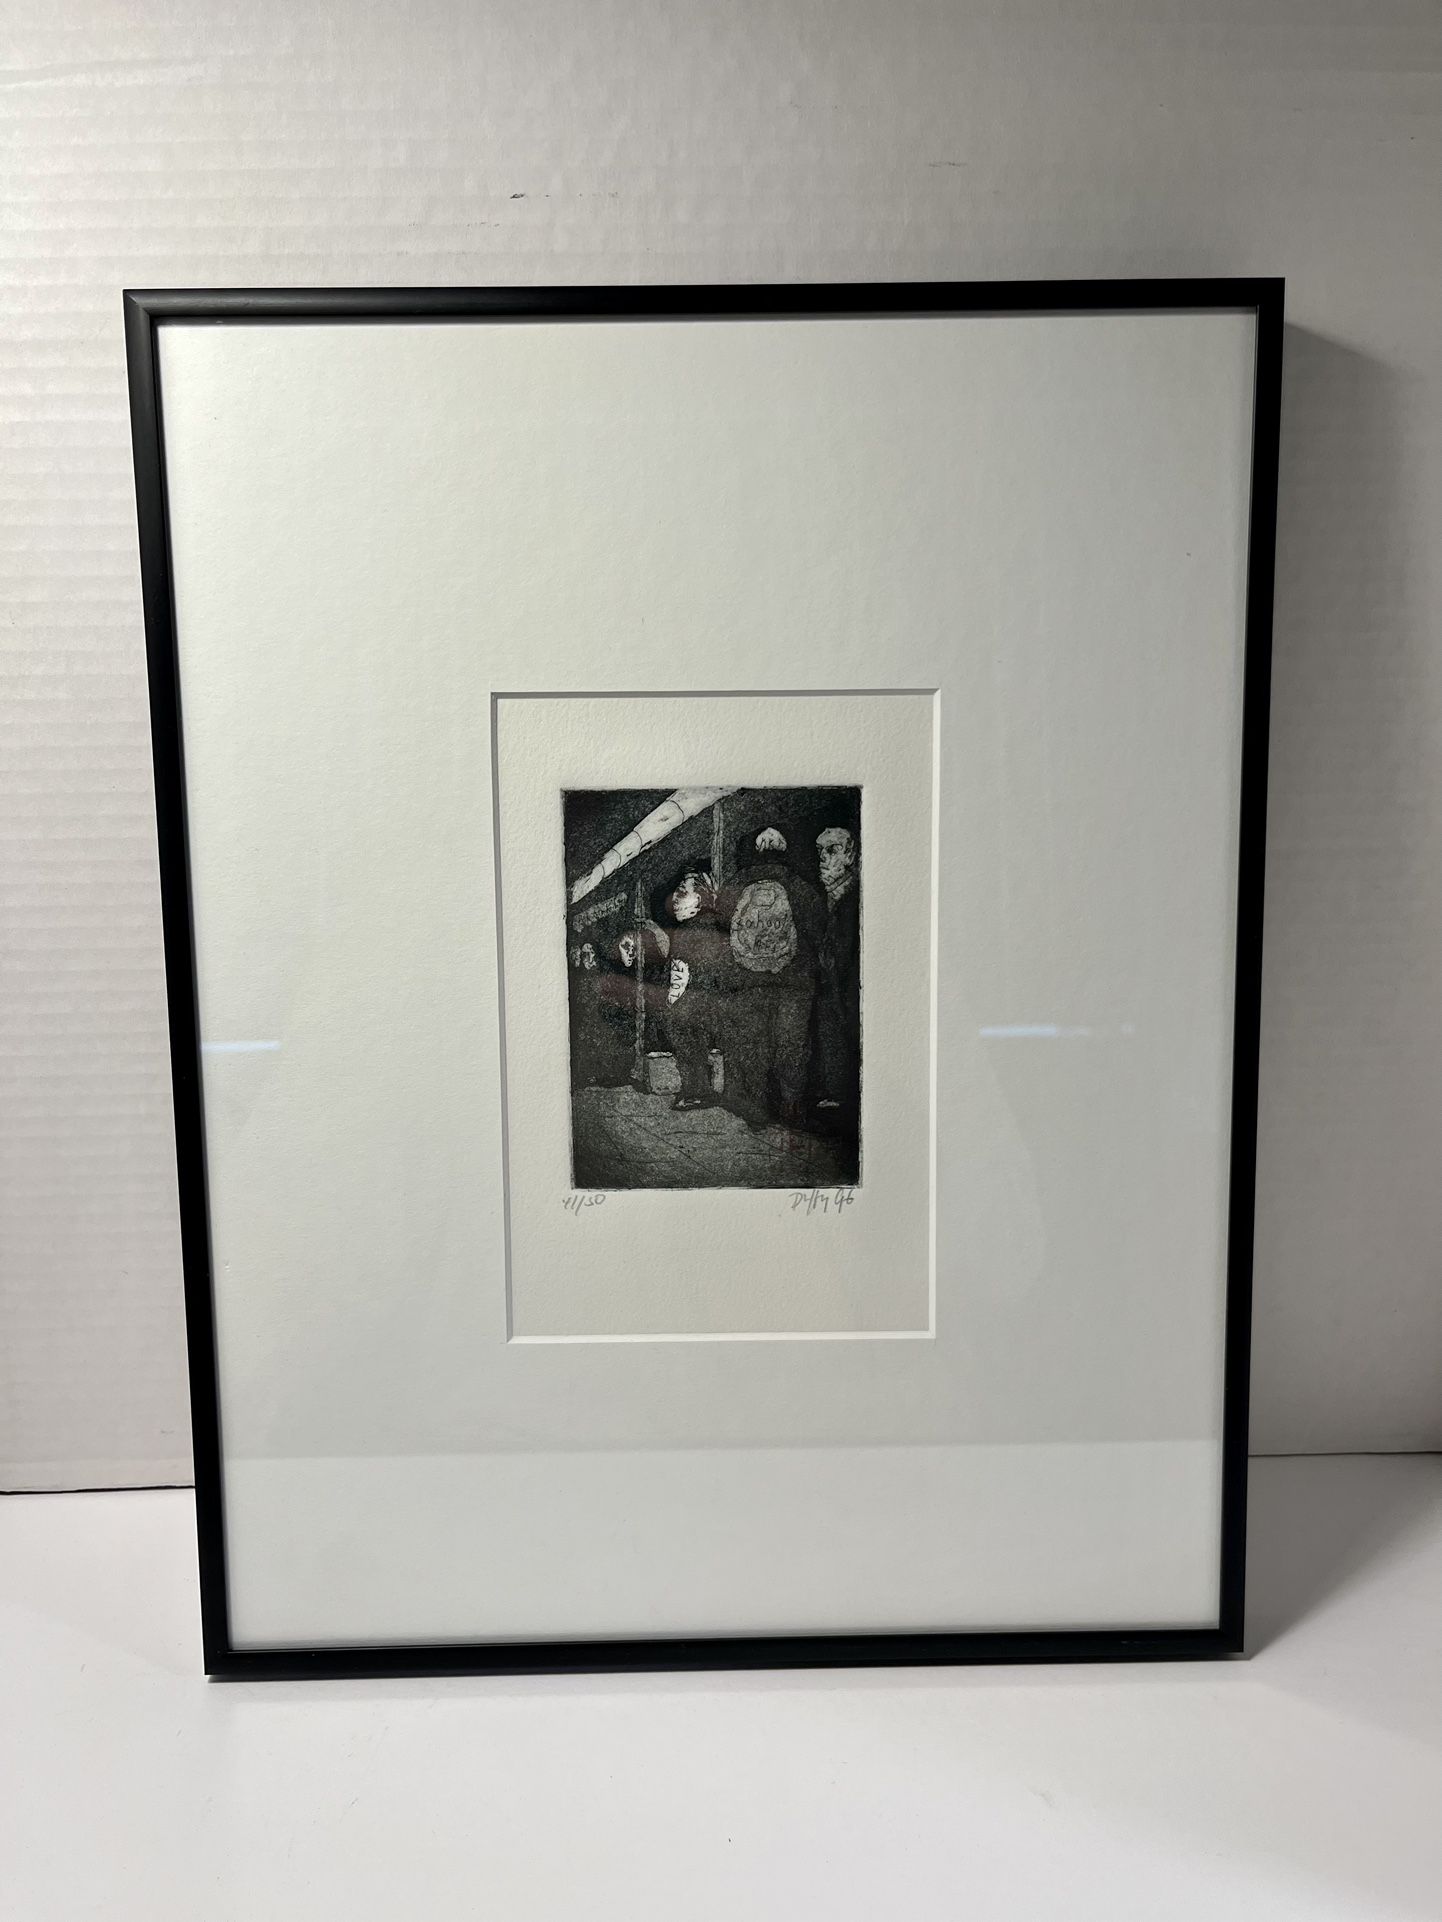 RARE 1996 Stephen Francis Duffy Signed & Numbered Etching - NY Subway